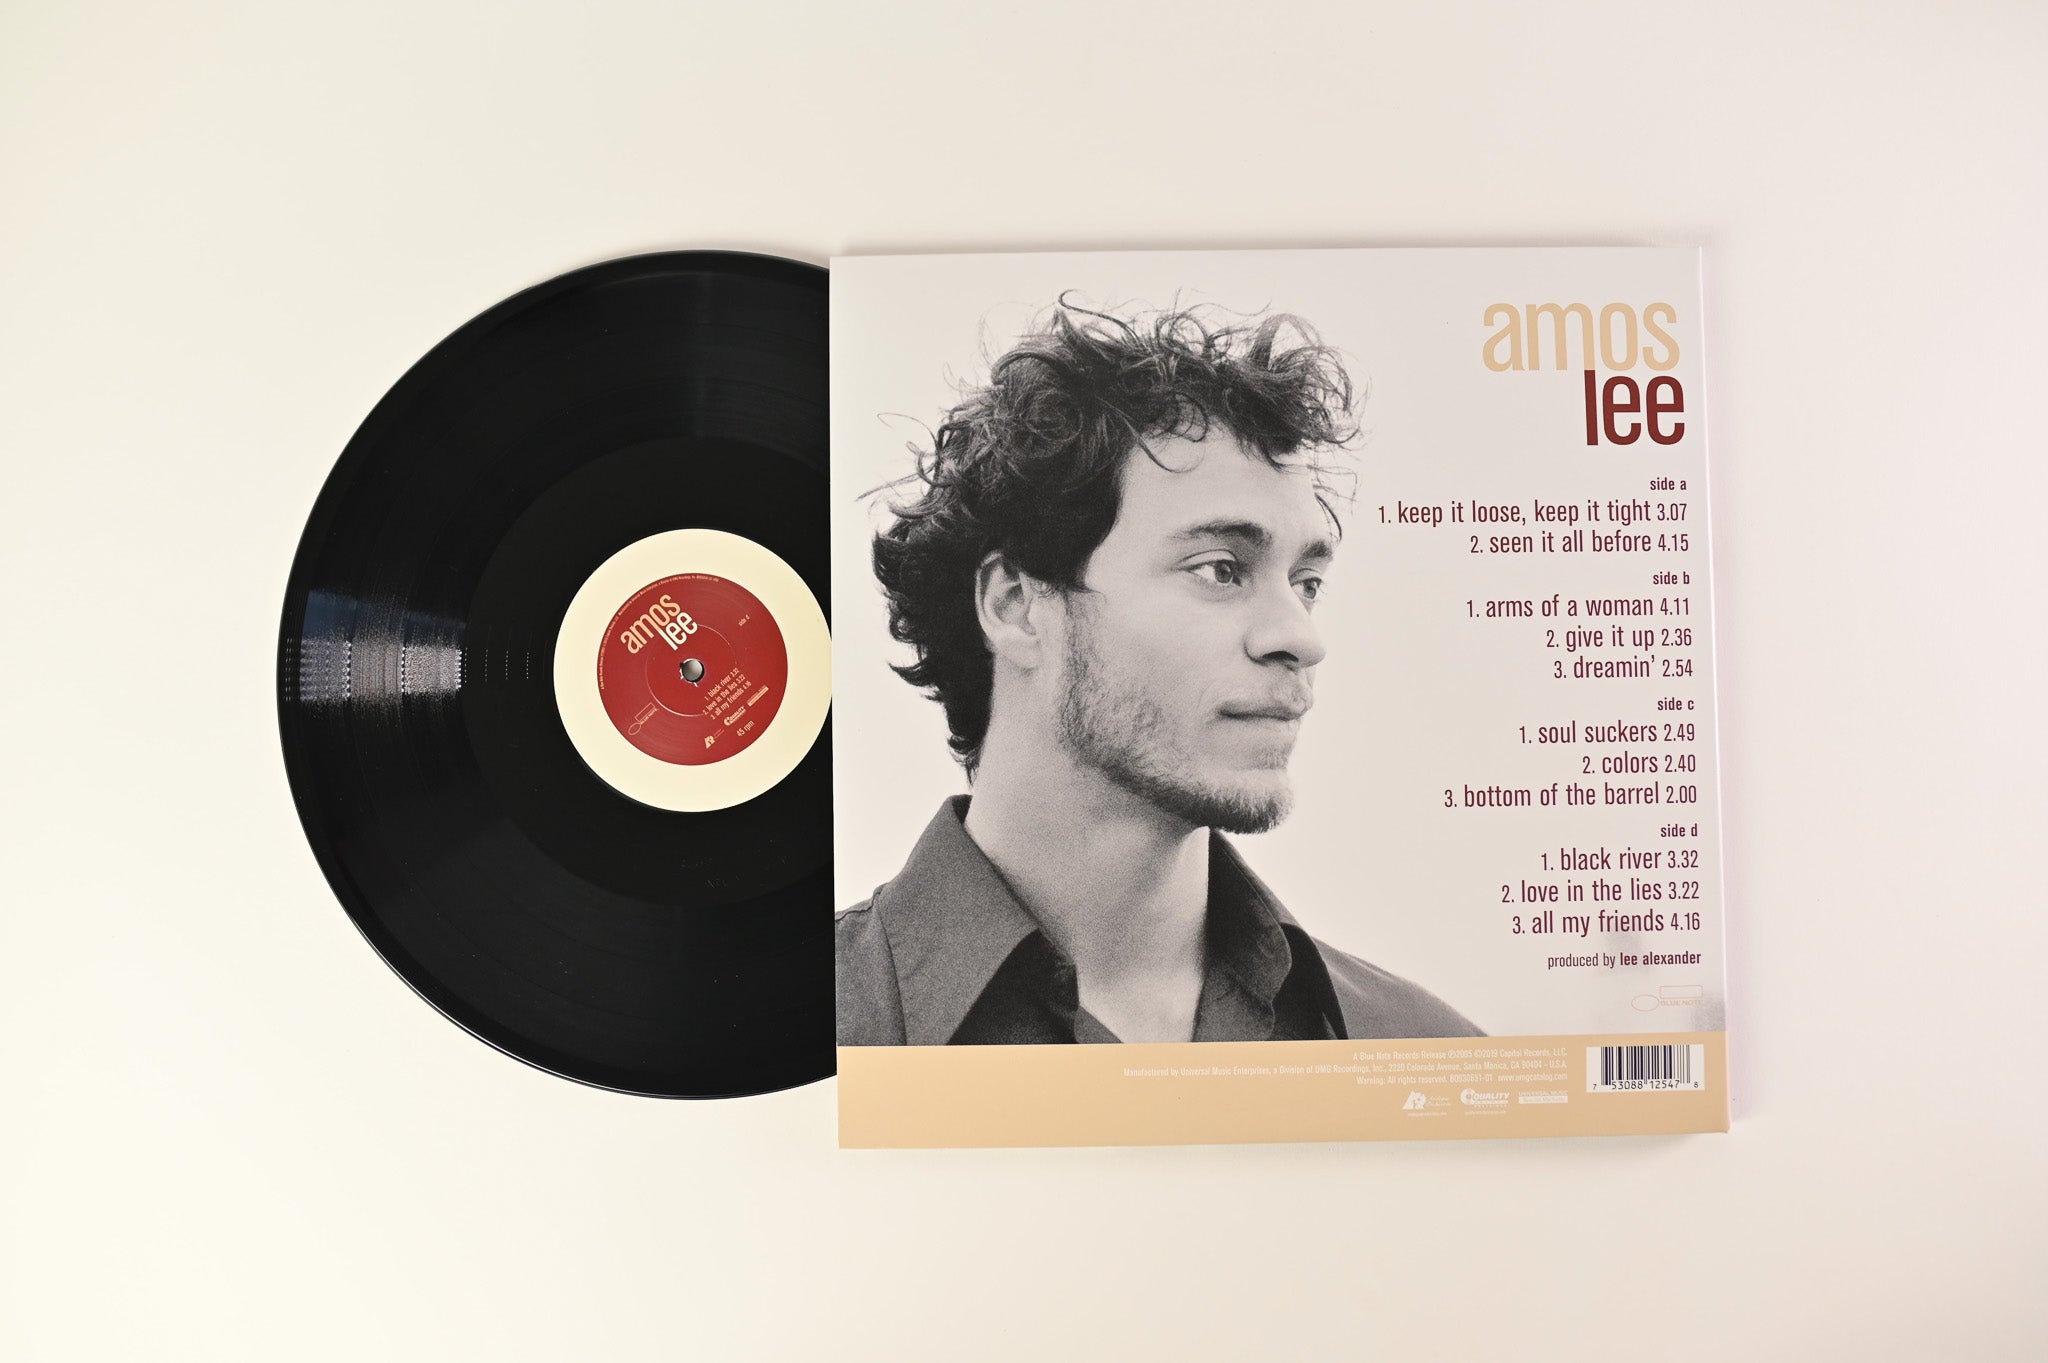 Amos Lee - Amos Lee on Blue Note Analogue Productions 45 RPM Reissue